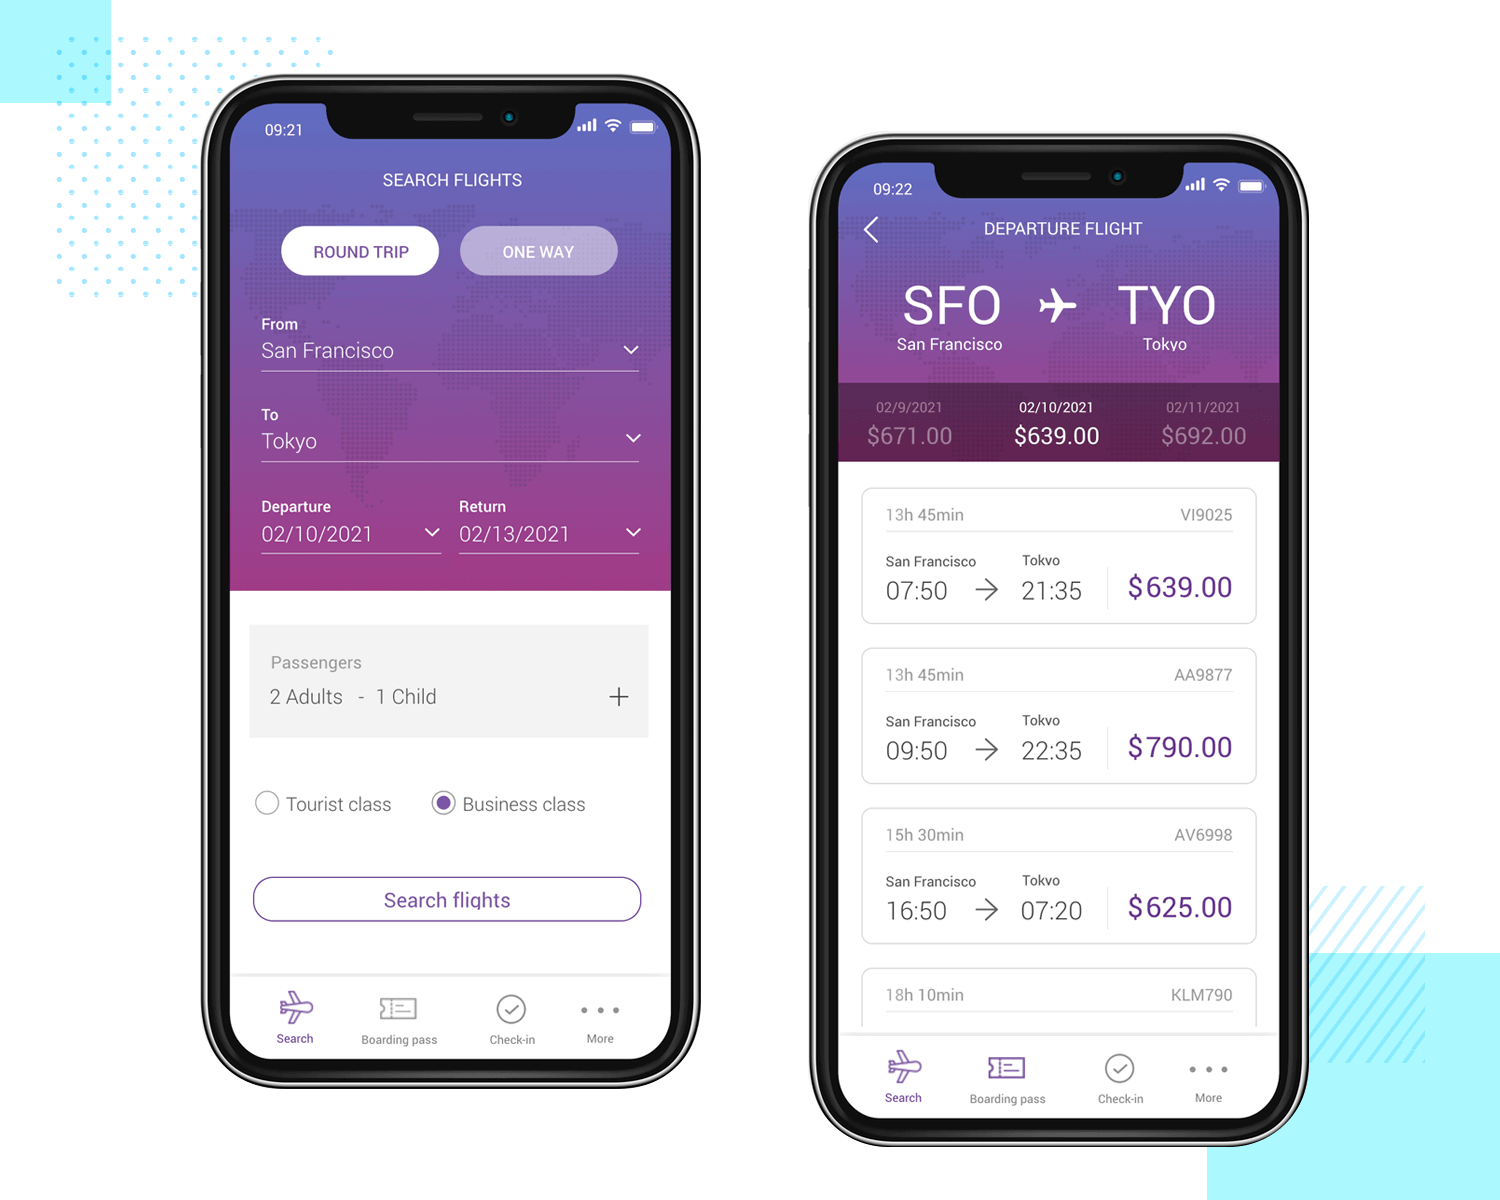 Example of a high fidelity flight-booking app from Justinmind